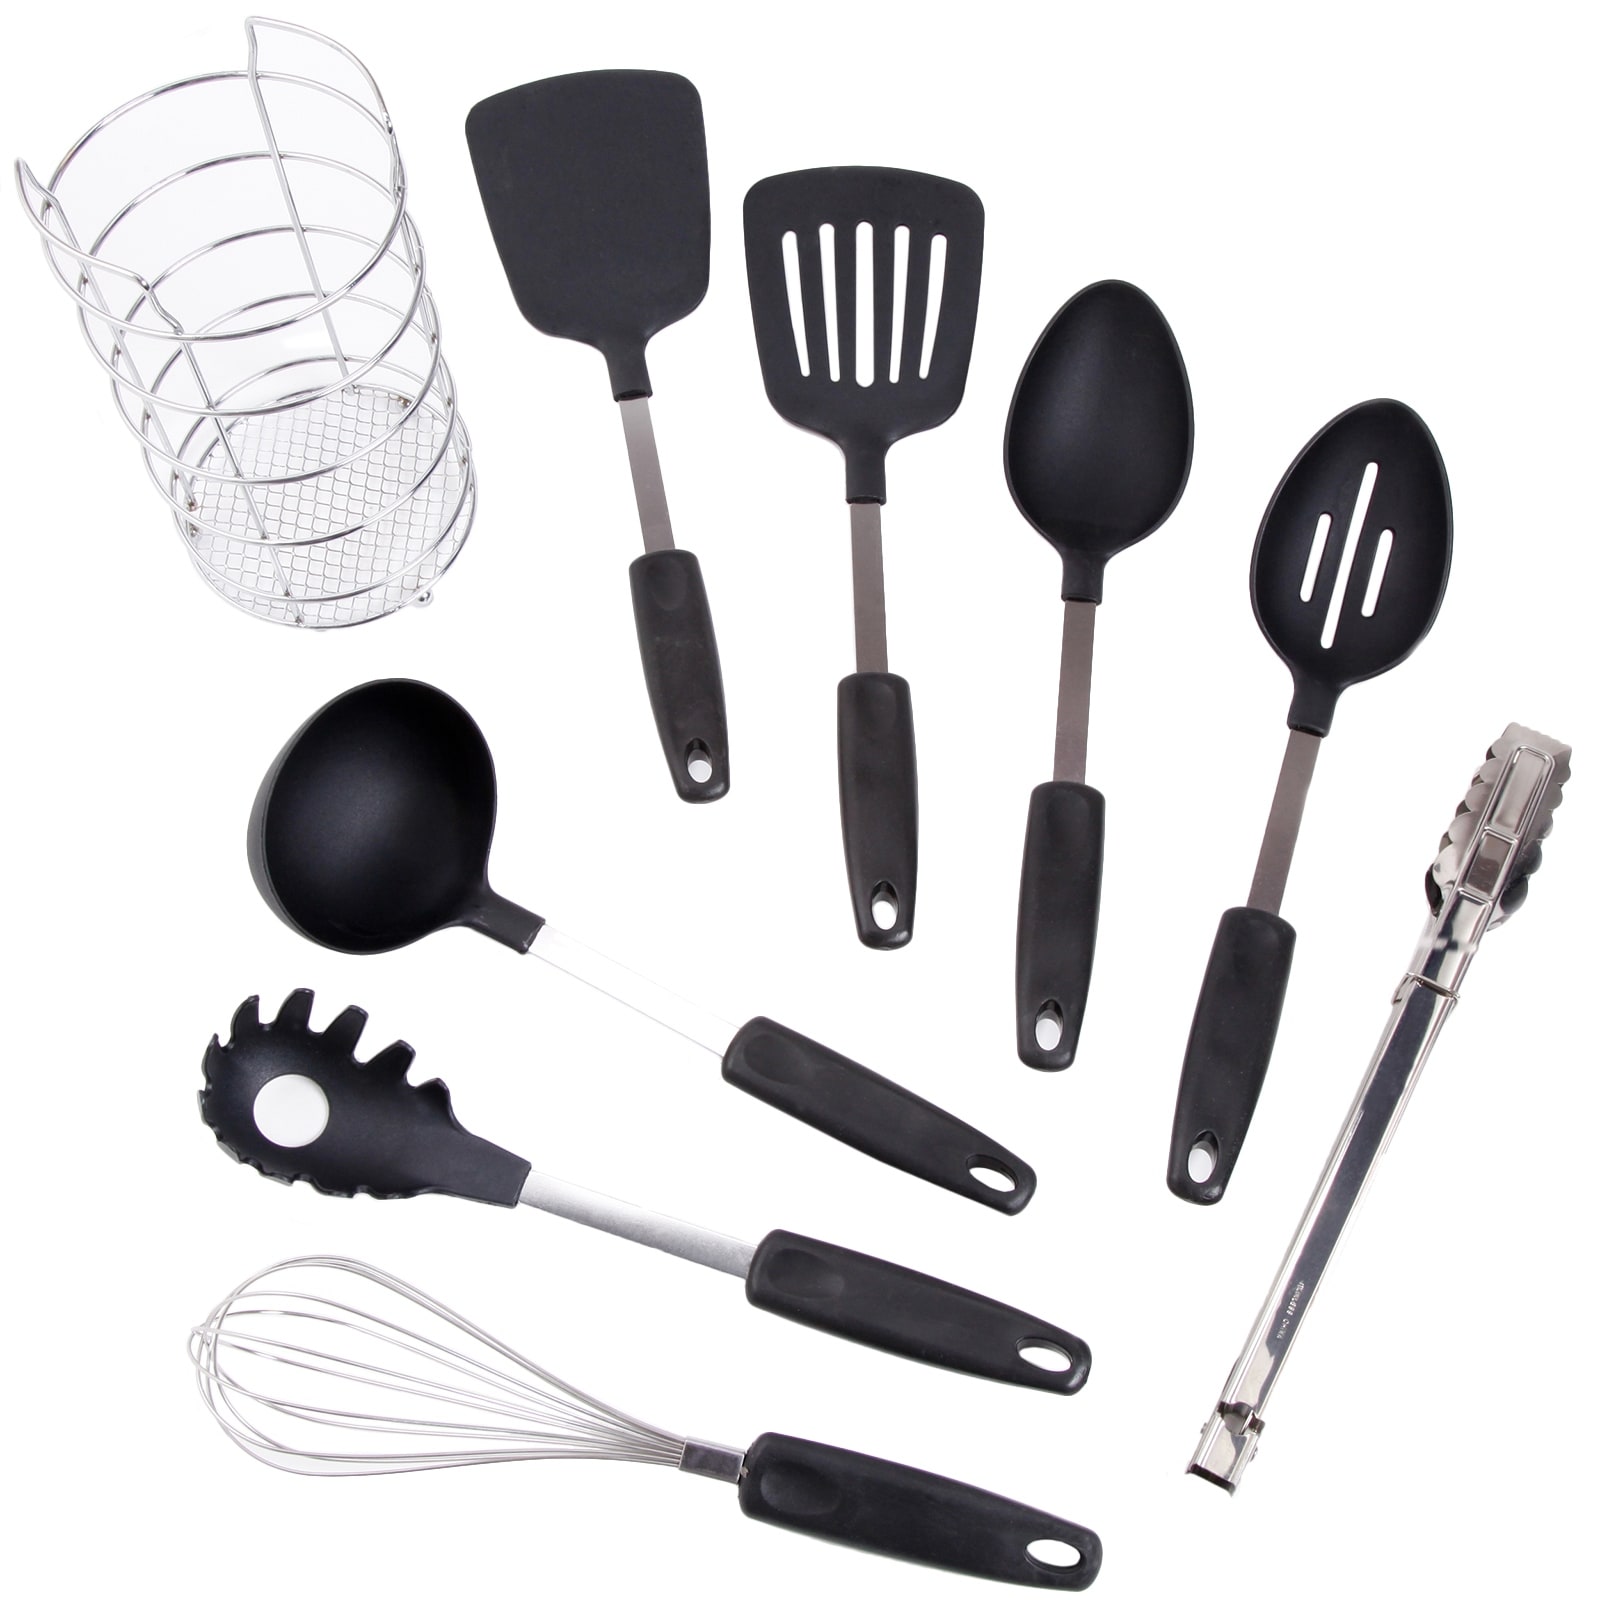 https://ak1.ostkcdn.com/images/products/is/images/direct/8fab2aec0832f9f1363febe5002bed3095376190/Gibson-Chef%27s-Better-Basics-9-Piece-Utensil-Set-with-Round-Shape-Wire-Caddy.jpg